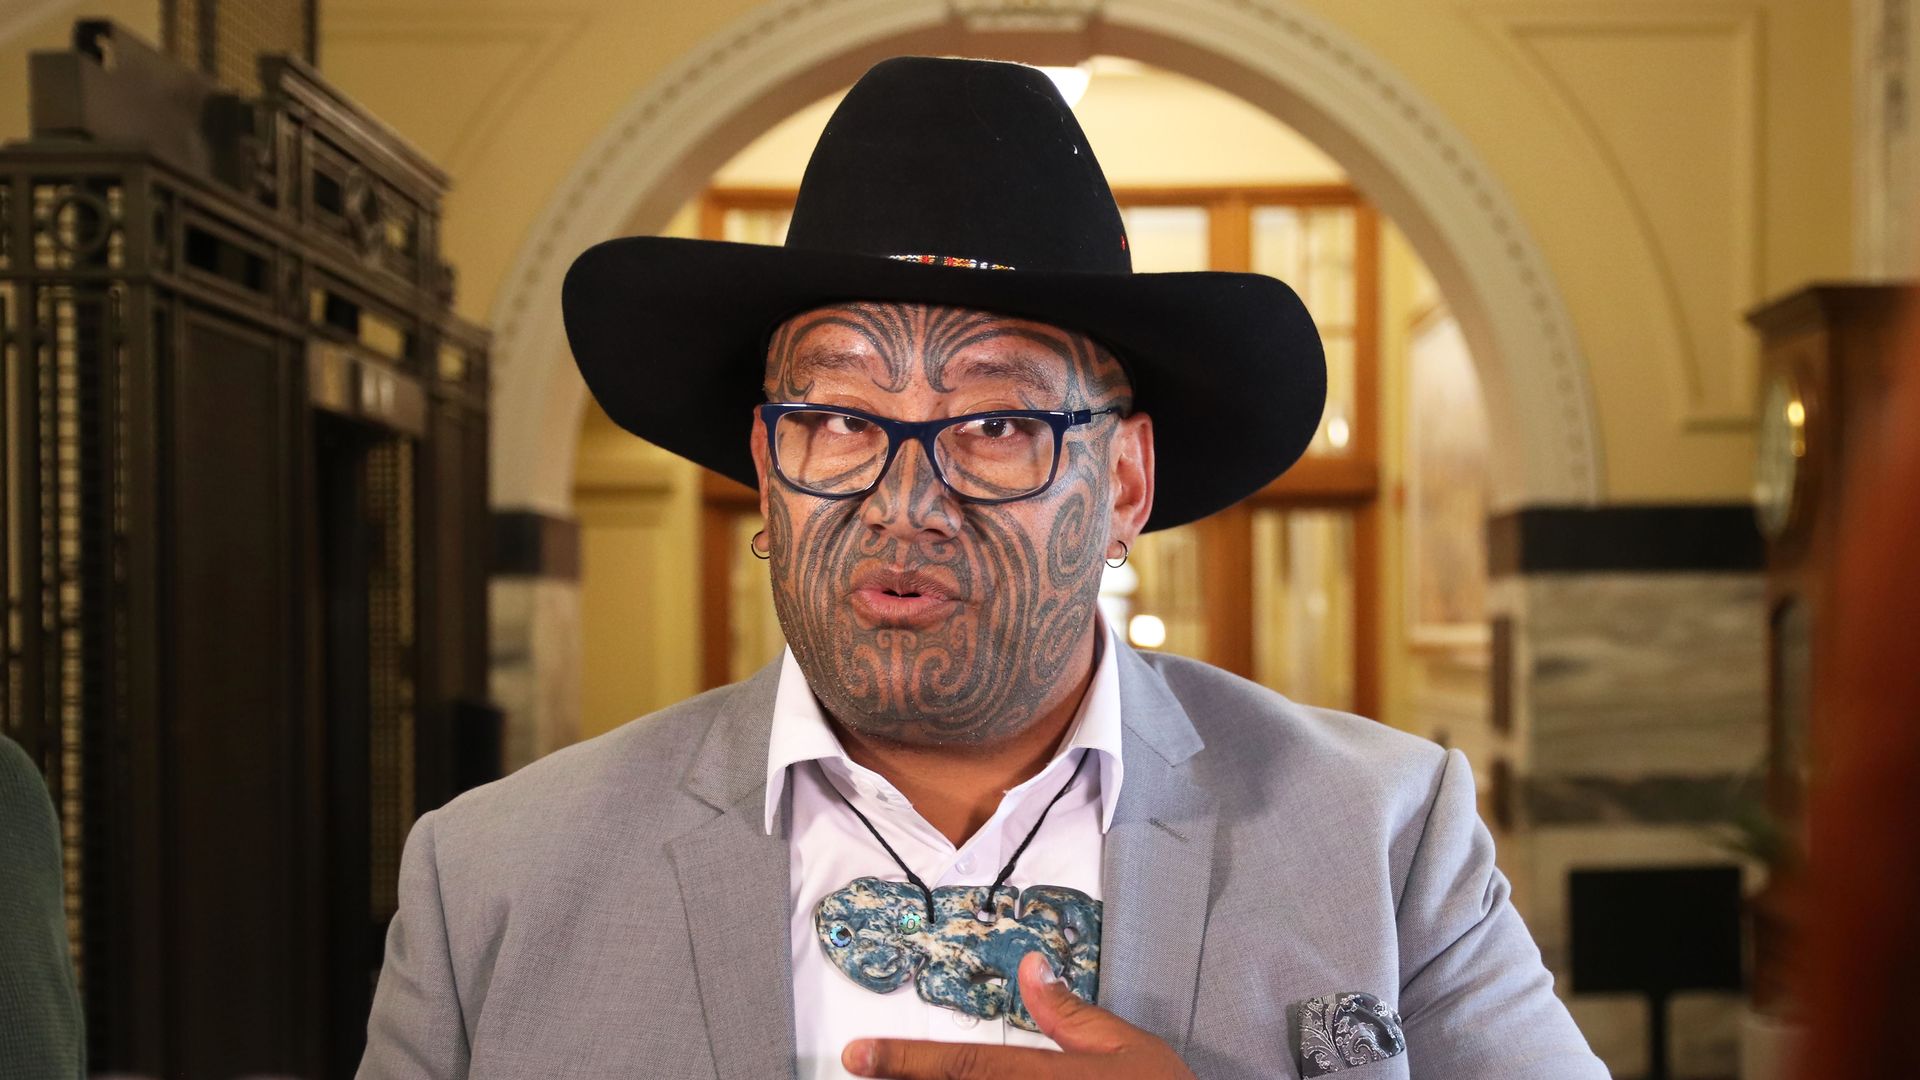 Maori Party Co-leader Rawiri Waititi talks to reporters at Parliament after being told to leave the debating chamber on February 09, 2021 in Wellington